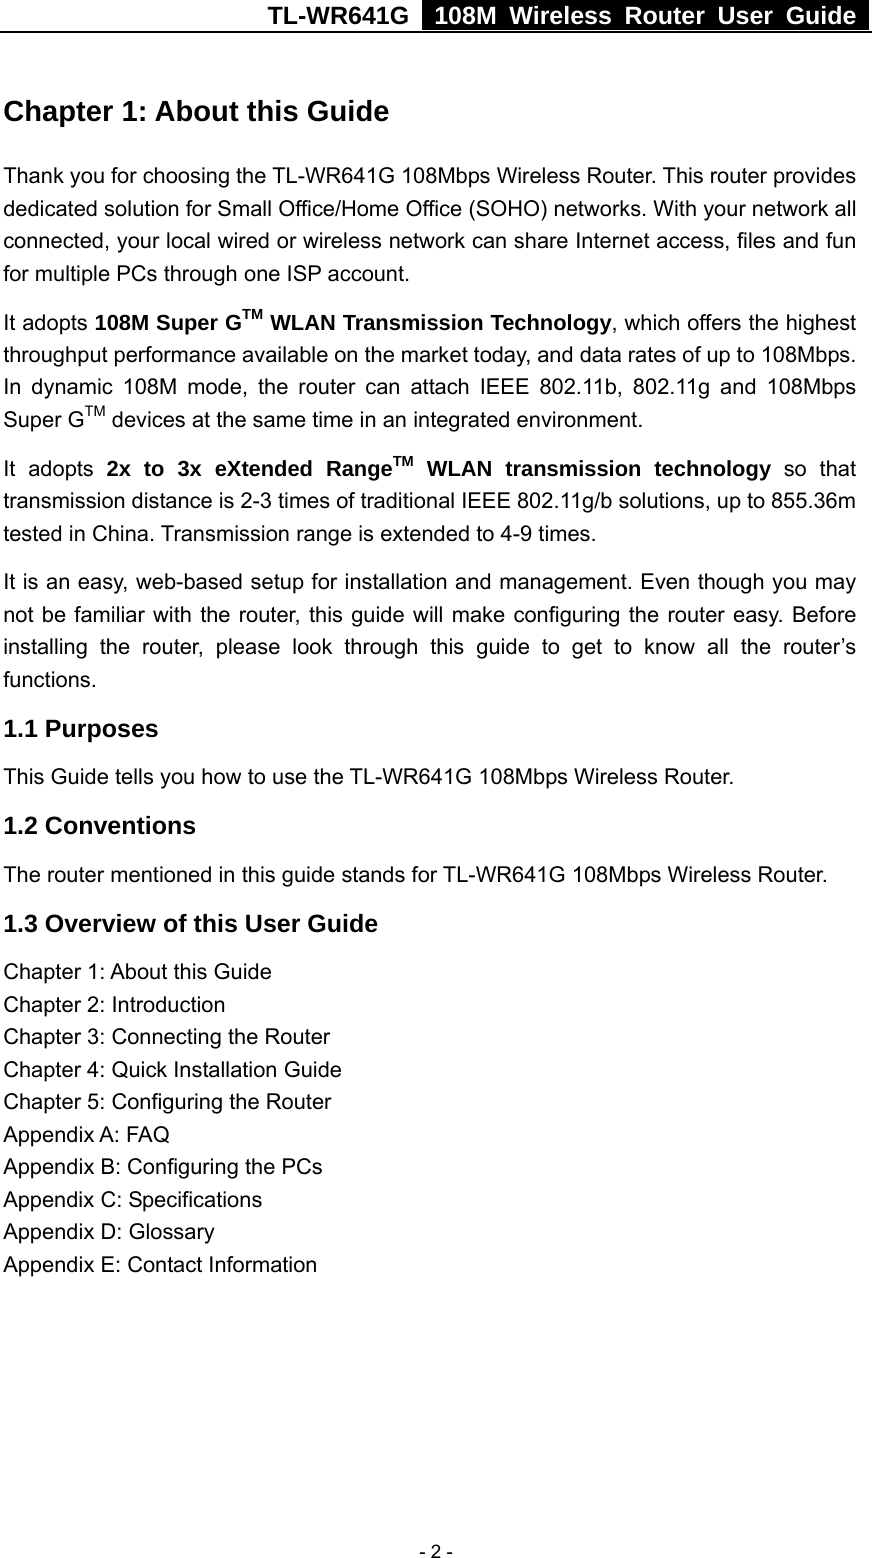 TL-WR641G   108M Wireless Router User Guide   - 2 -Chapter 1: About this Guide Thank you for choosing the TL-WR641G 108Mbps Wireless Router. This router provides dedicated solution for Small Office/Home Office (SOHO) networks. With your network all connected, your local wired or wireless network can share Internet access, files and fun for multiple PCs through one ISP account.     It adopts 108M Super GTM WLAN Transmission Technology, which offers the highest throughput performance available on the market today, and data rates of up to 108Mbps. In dynamic 108M mode, the router can attach IEEE 802.11b, 802.11g and 108Mbps Super GTM devices at the same time in an integrated environment. It adopts 2x to 3x eXtended RangeTM WLAN transmission technology so that transmission distance is 2-3 times of traditional IEEE 802.11g/b solutions, up to 855.36m tested in China. Transmission range is extended to 4-9 times. It is an easy, web-based setup for installation and management. Even though you may not be familiar with the router, this guide will make configuring the router easy. Before installing the router, please look through this guide to get to know all the router’s functions. 1.1 Purposes This Guide tells you how to use the TL-WR641G 108Mbps Wireless Router.   1.2 Conventions The router mentioned in this guide stands for TL-WR641G 108Mbps Wireless Router. 1.3 Overview of this User Guide Chapter 1: About this Guide Chapter 2: Introduction Chapter 3: Connecting the Router Chapter 4: Quick Installation Guide Chapter 5: Configuring the Router Appendix A: FAQ Appendix B: Configuring the PCs Appendix C: Specifications Appendix D: Glossary Appendix E: Contact Information 